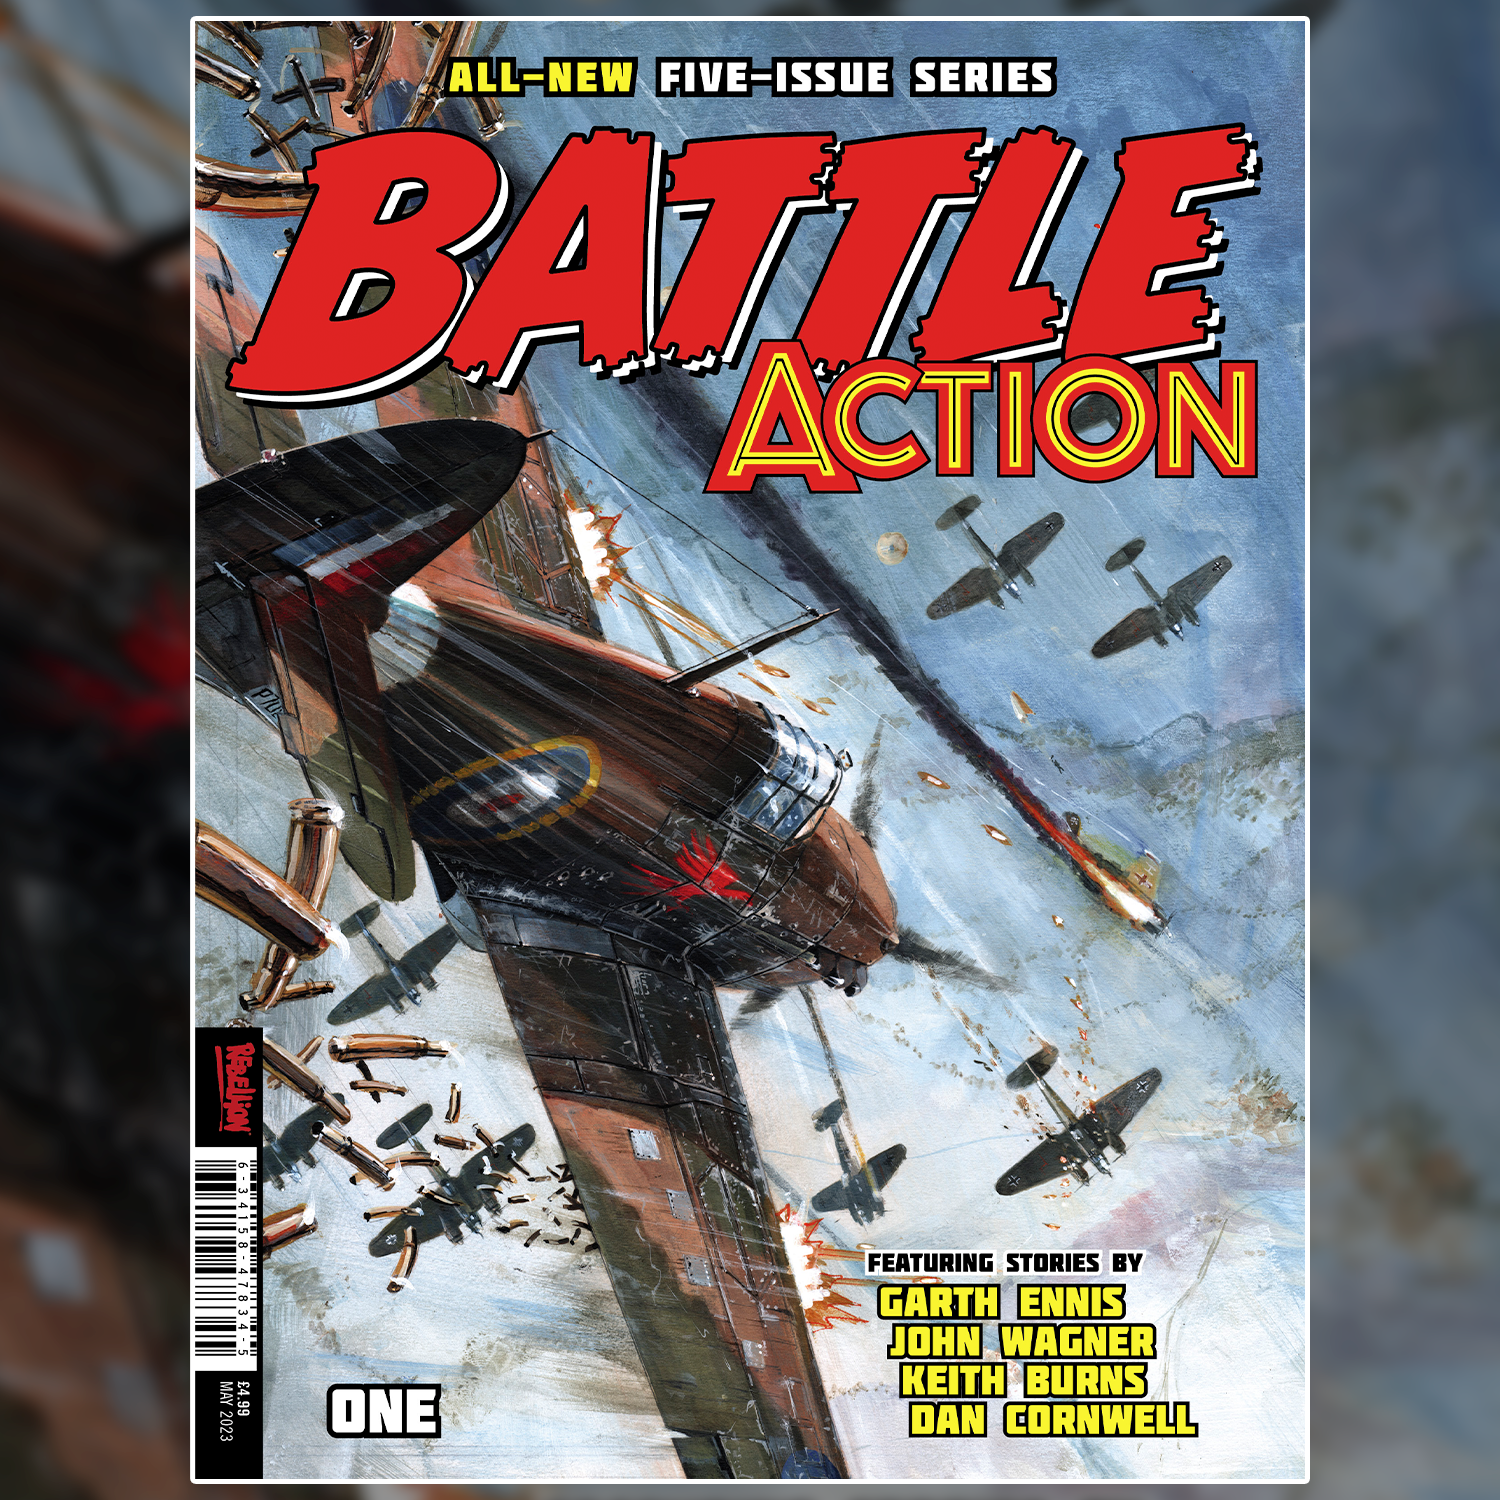 New Battle Action series coming May 2023!